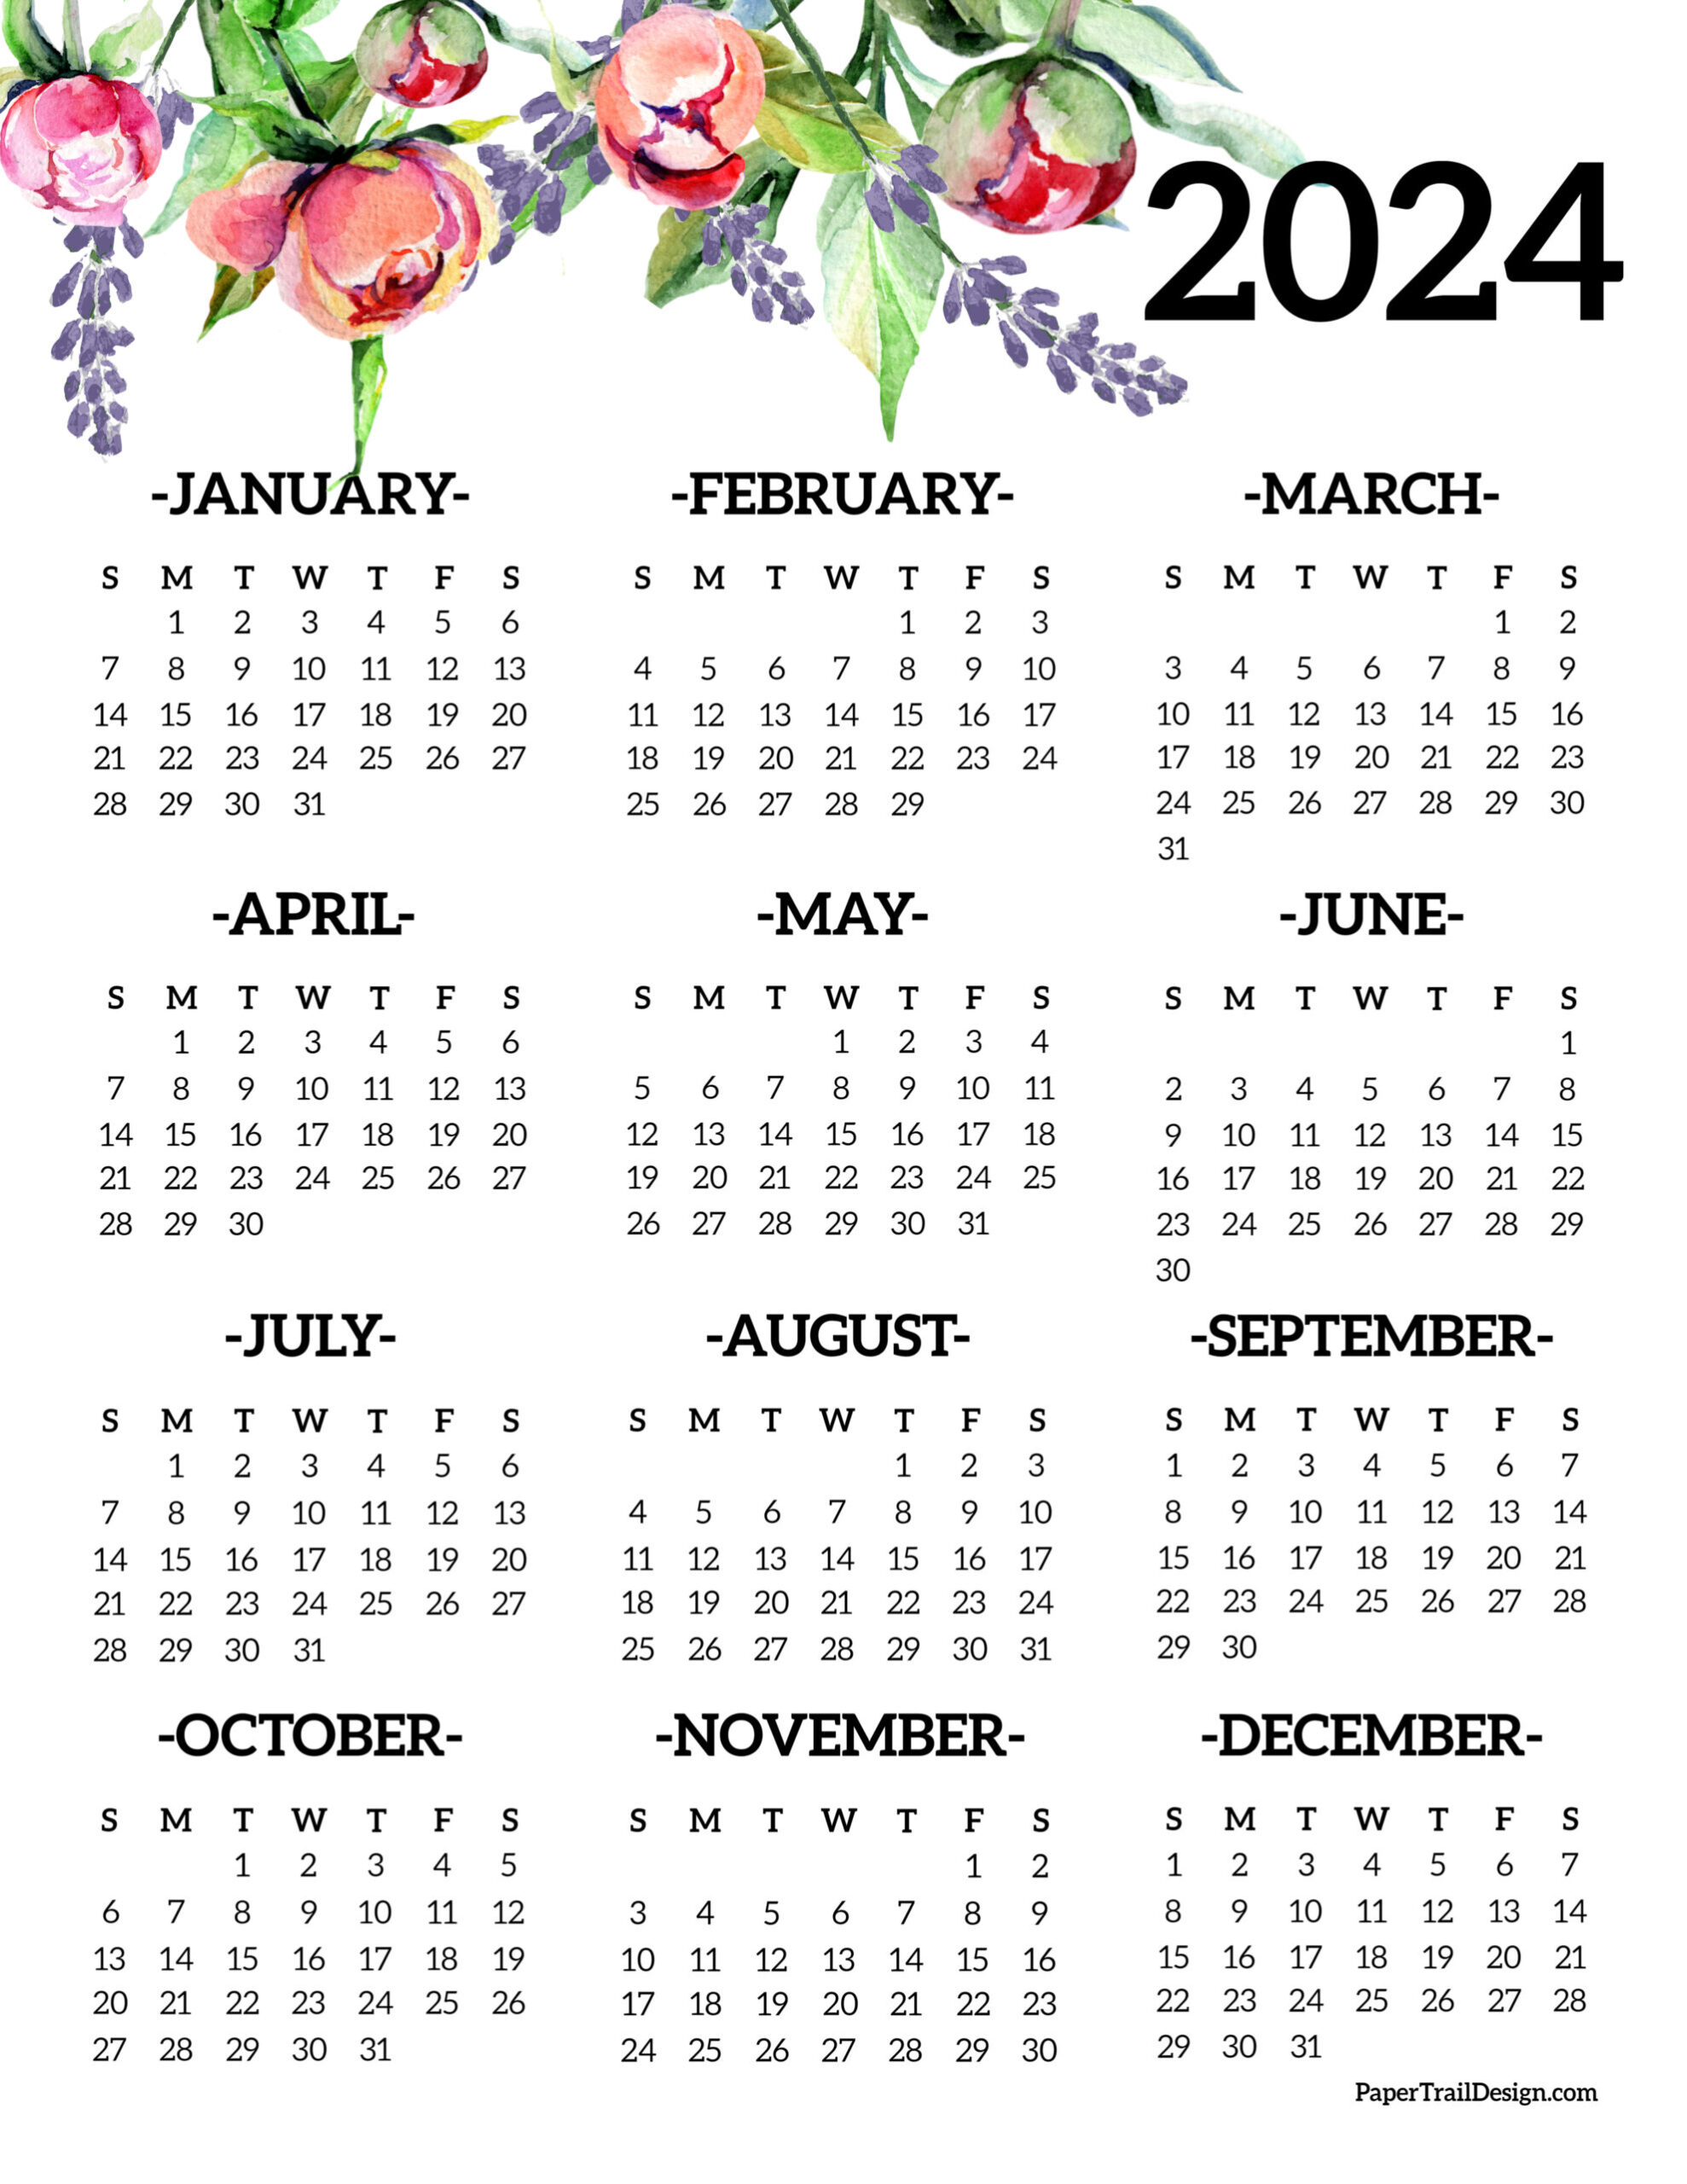 Calendar 2024 Printable One Page - Paper Trail Design for Printable 2024 Yearly Calendar One Page